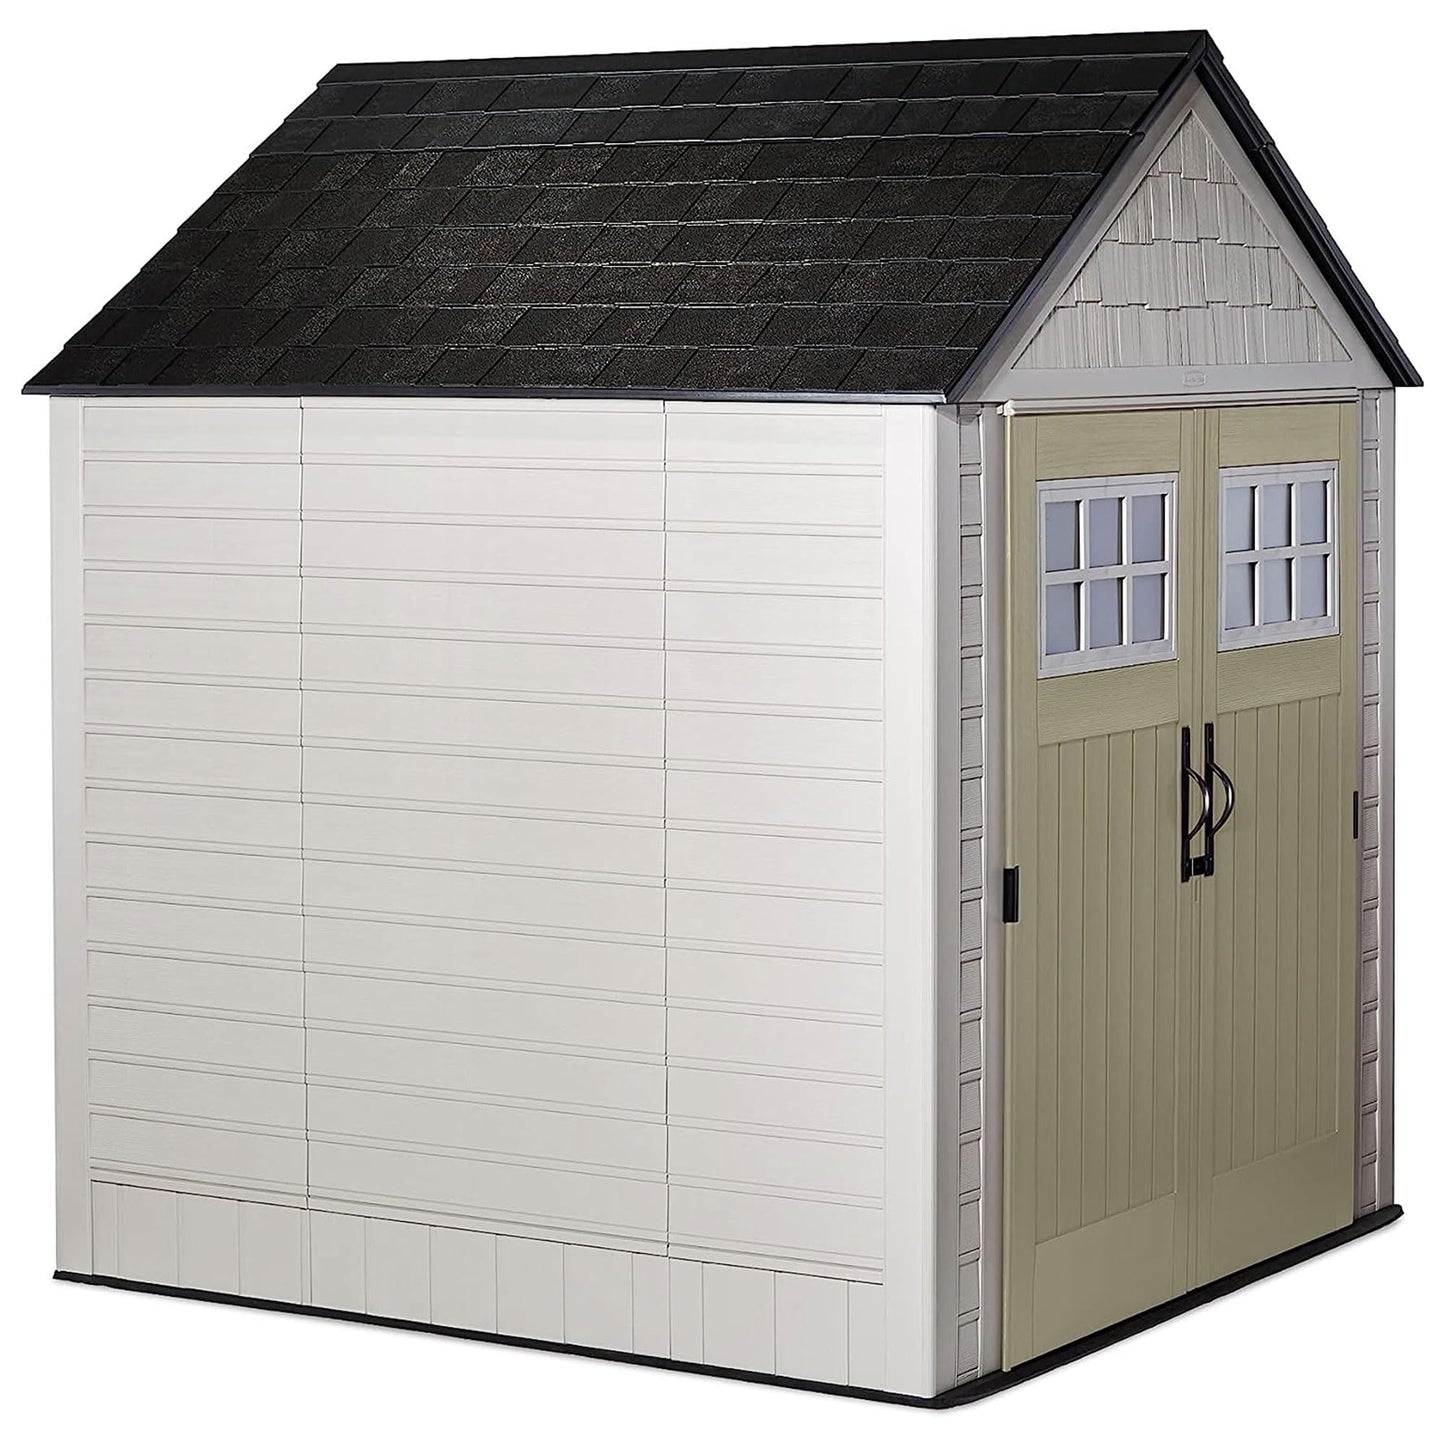 Rubbermaid 7 x 7 Foot Durable Weatherproof Resin Outdoor Storage Shed for Garden Tool and Lawn Machinery Organization, Sandstone